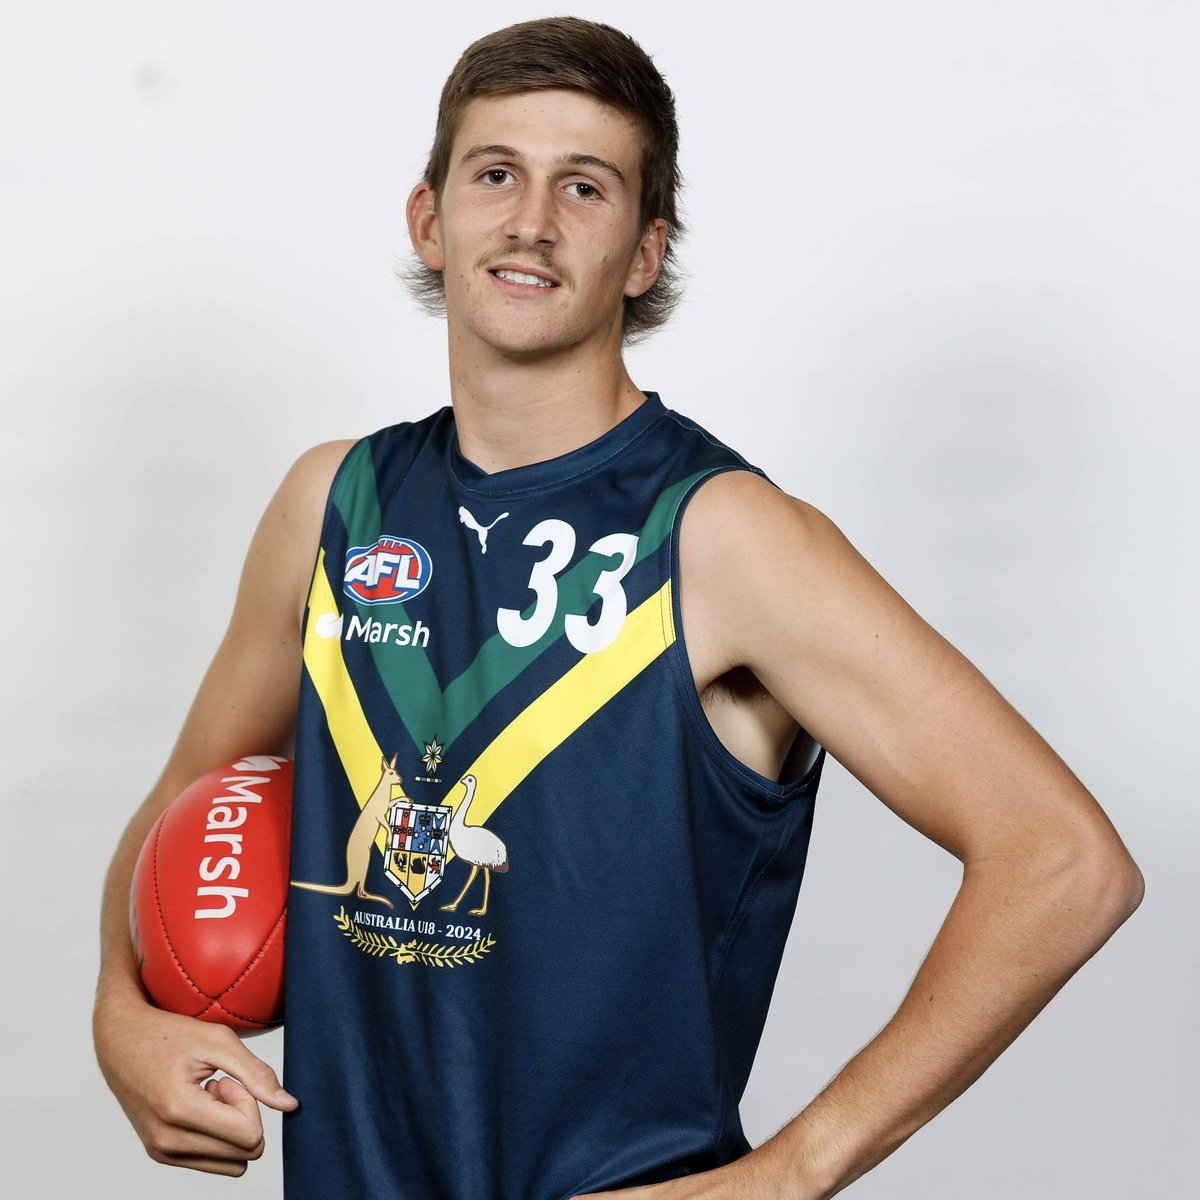 Best of luck to Devils ruck Oliver Dean, who will pull on the Australian jumper and represent the AFL Academy for the first time today! 👏 The Academy will take on Coburg at 1:00 PM today, with the game streamed live on the AFL website.